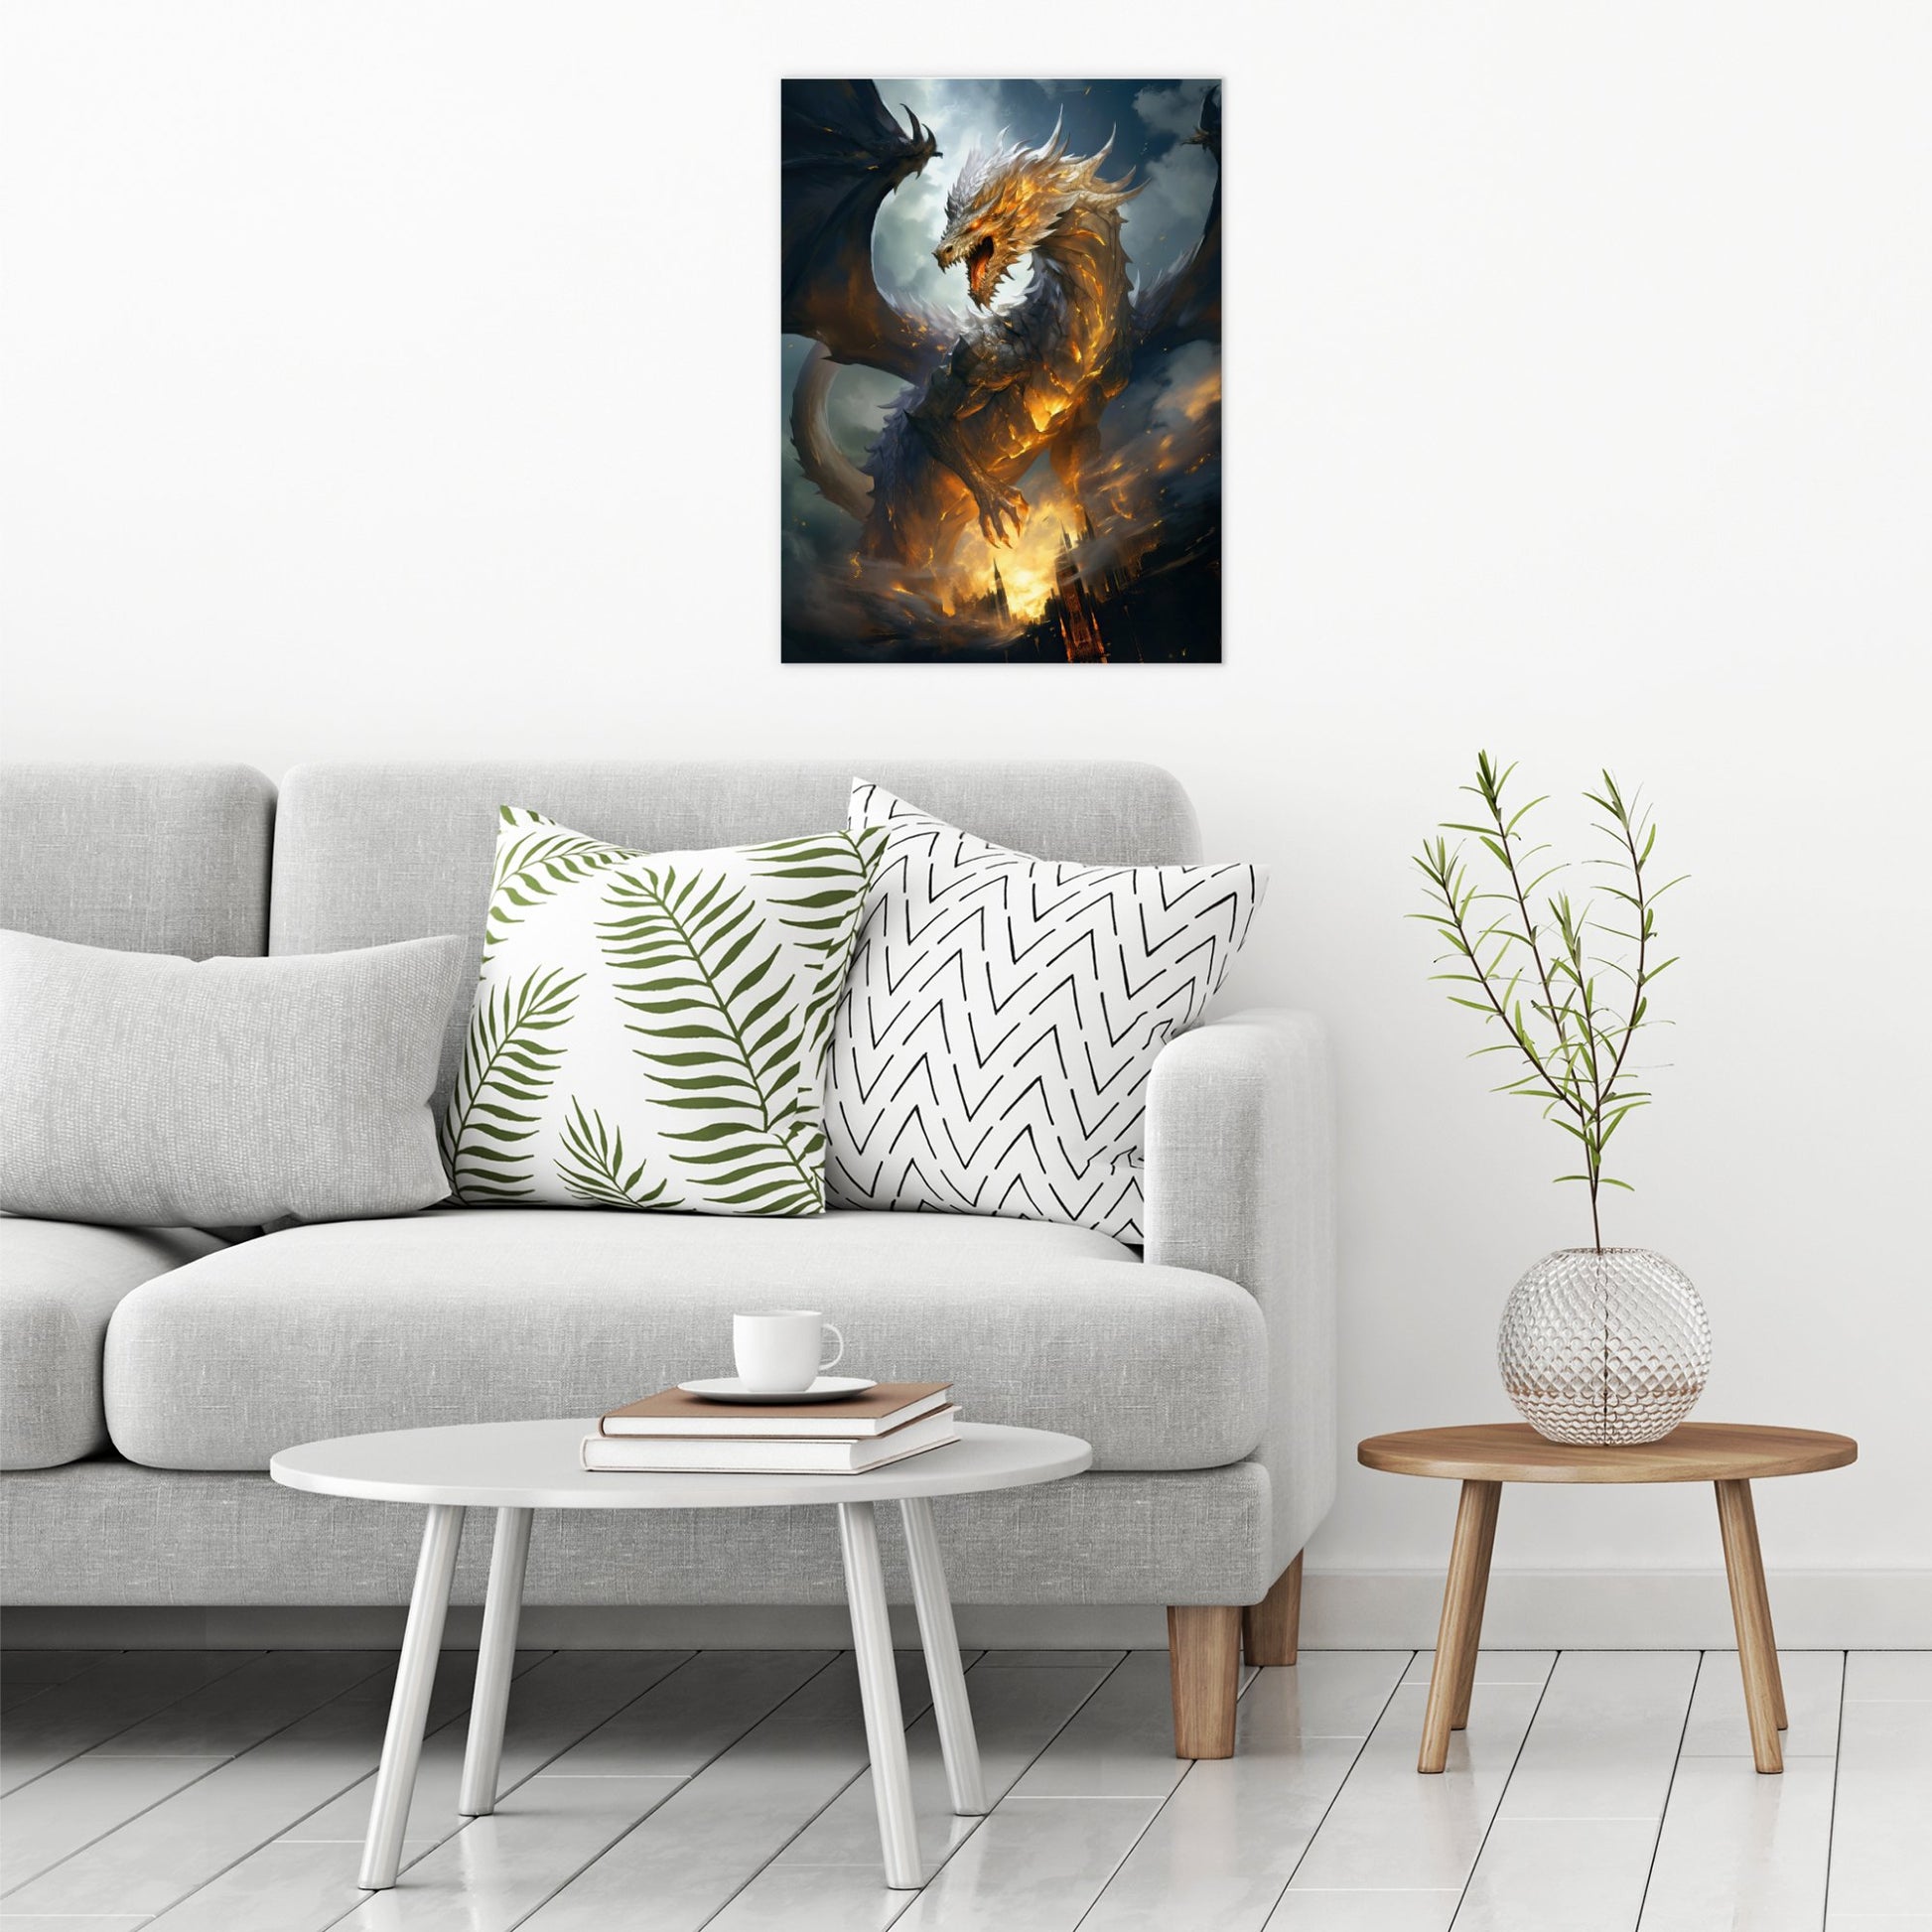 A contemporary modern room view showing a large size metal art poster display plate with printed design of a Golden Dragon Fantasy Painting